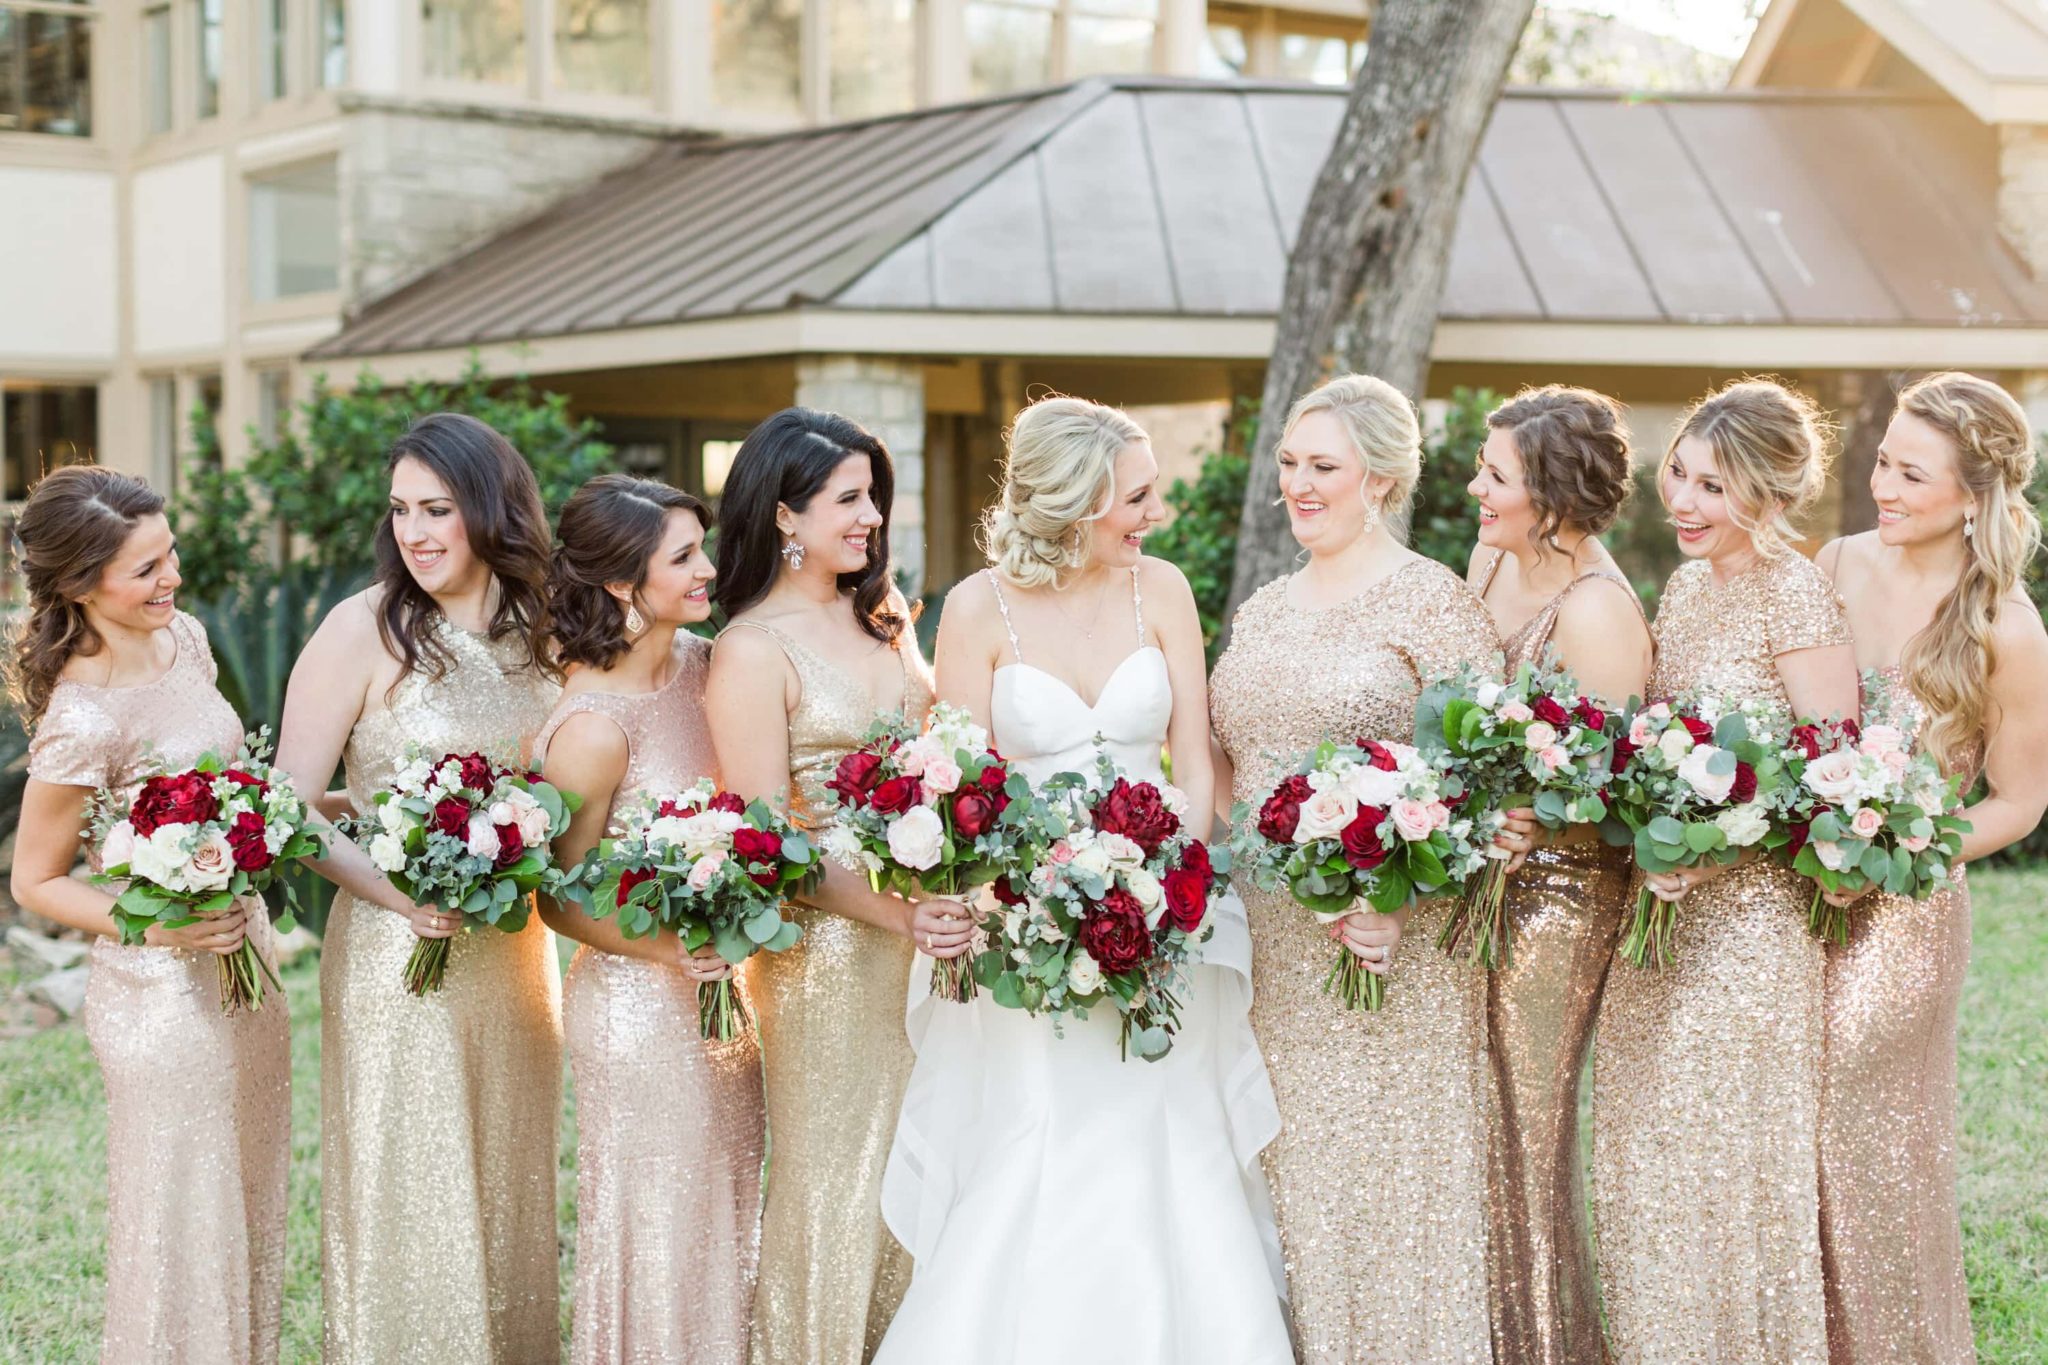 WHY YOUR WEDDING GUEST COUNT IS SO IMPORTANT